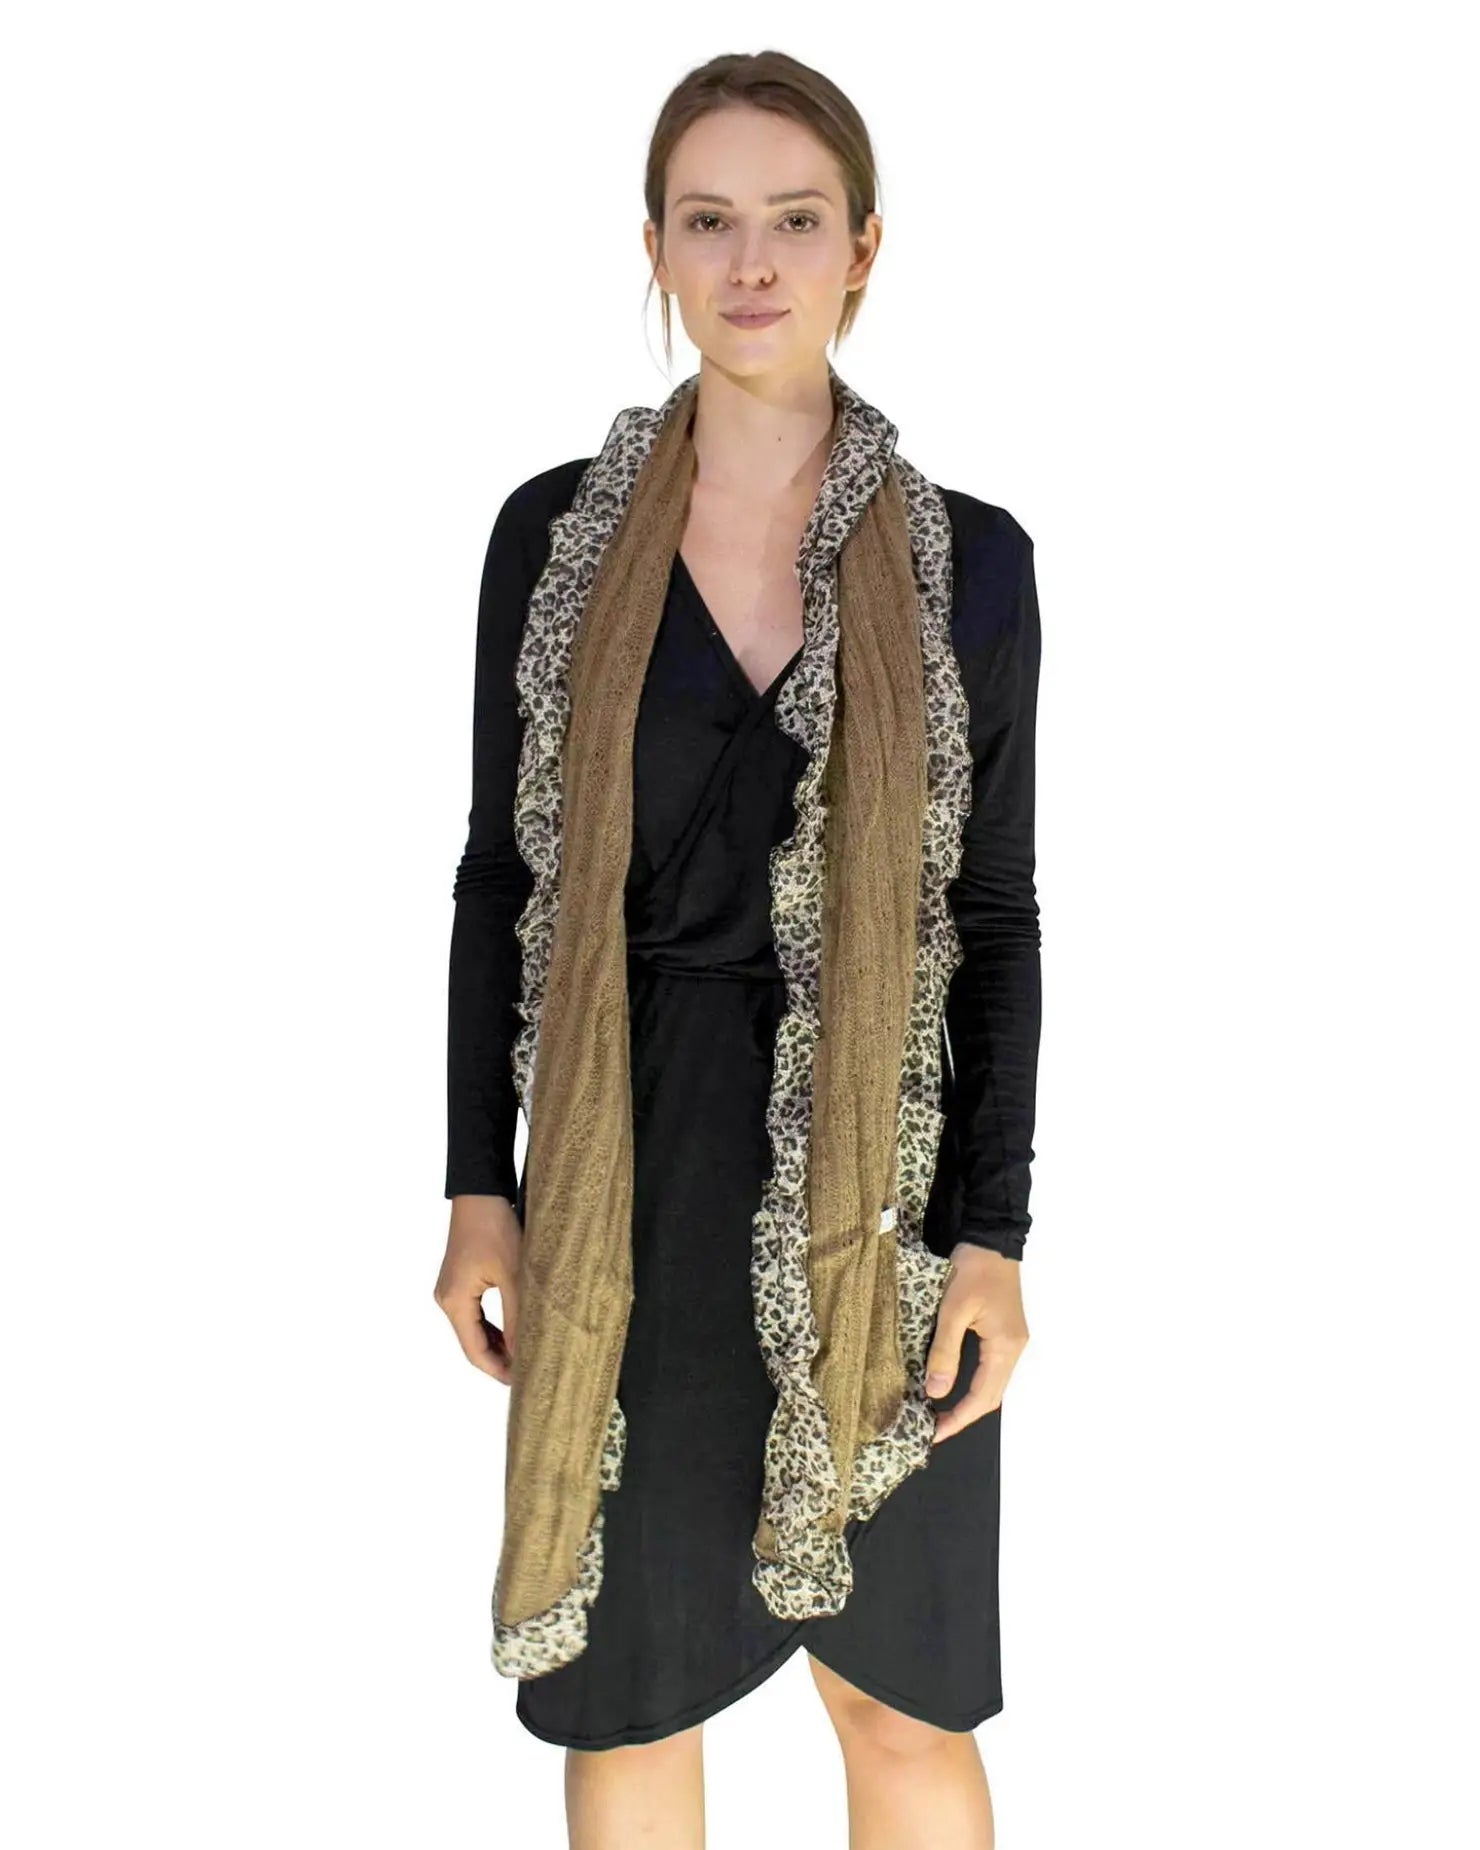 Woman in black dress and gold scarf, part of Ruffle Leopard Print Knitted Scarf product